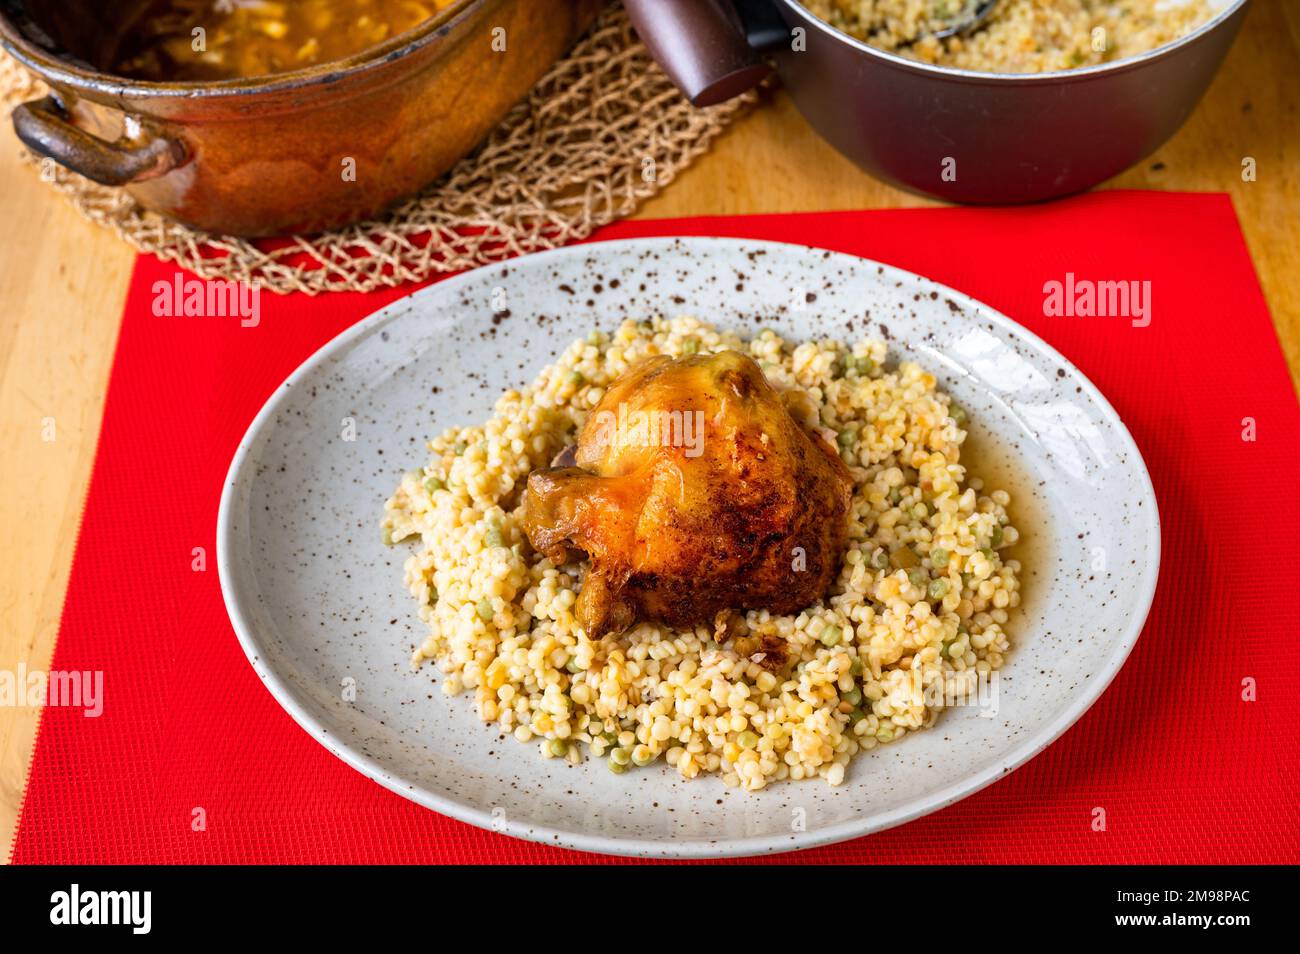 Baked chicken quarter with boiled tarhona (type of european pasta) on plate, pot on red background. Stock Photo